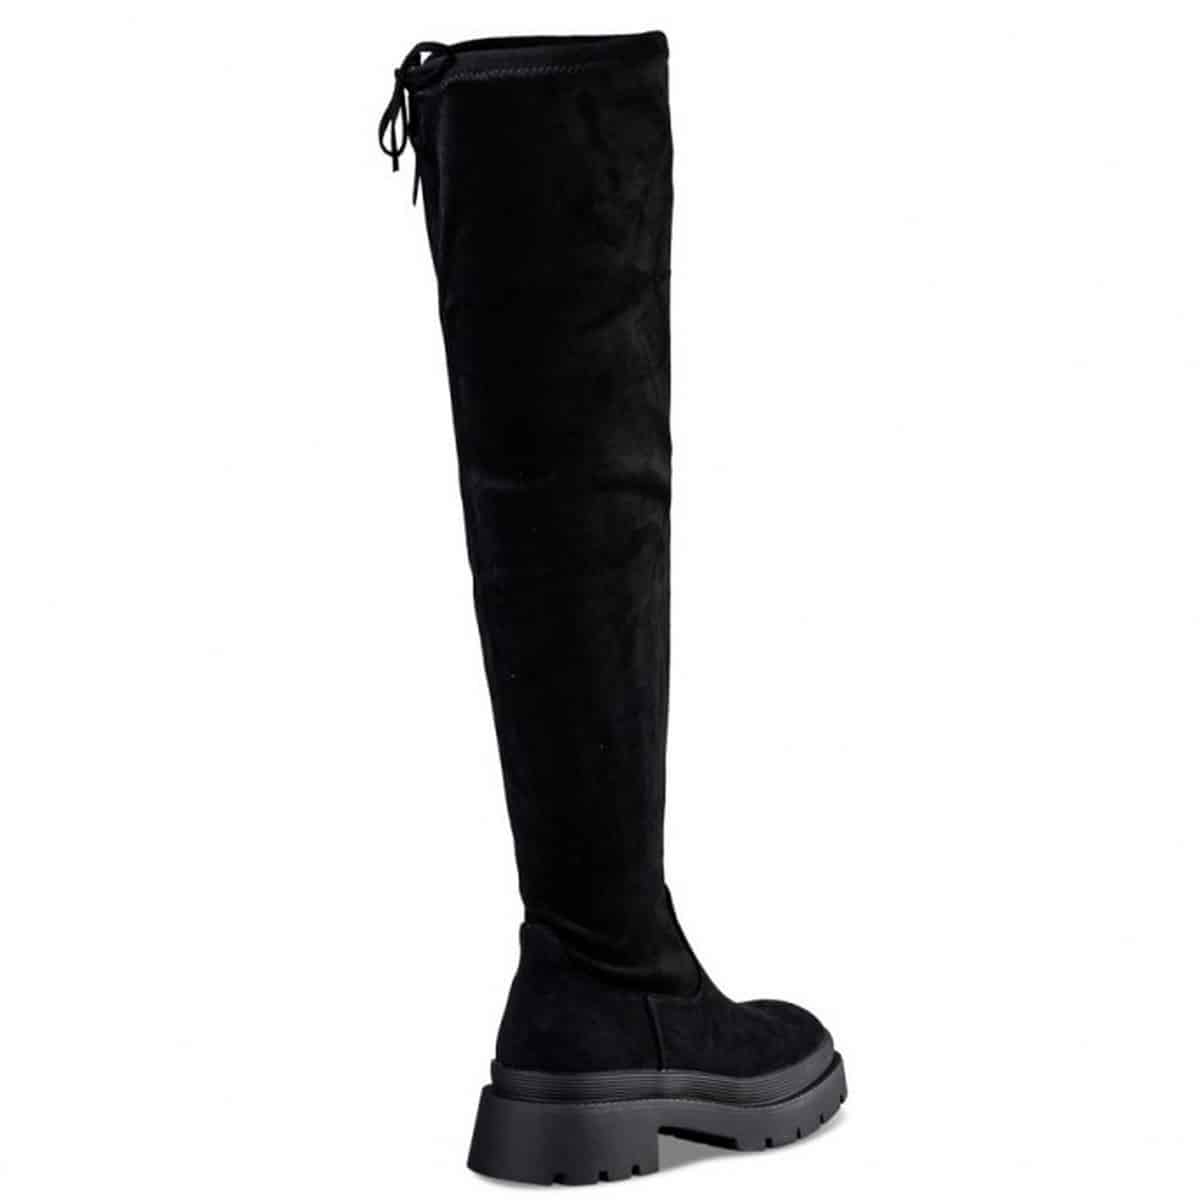 SUEDE OVER THE KNEE BOOTS E23-18102-34 ENVIE SHOES BLACK